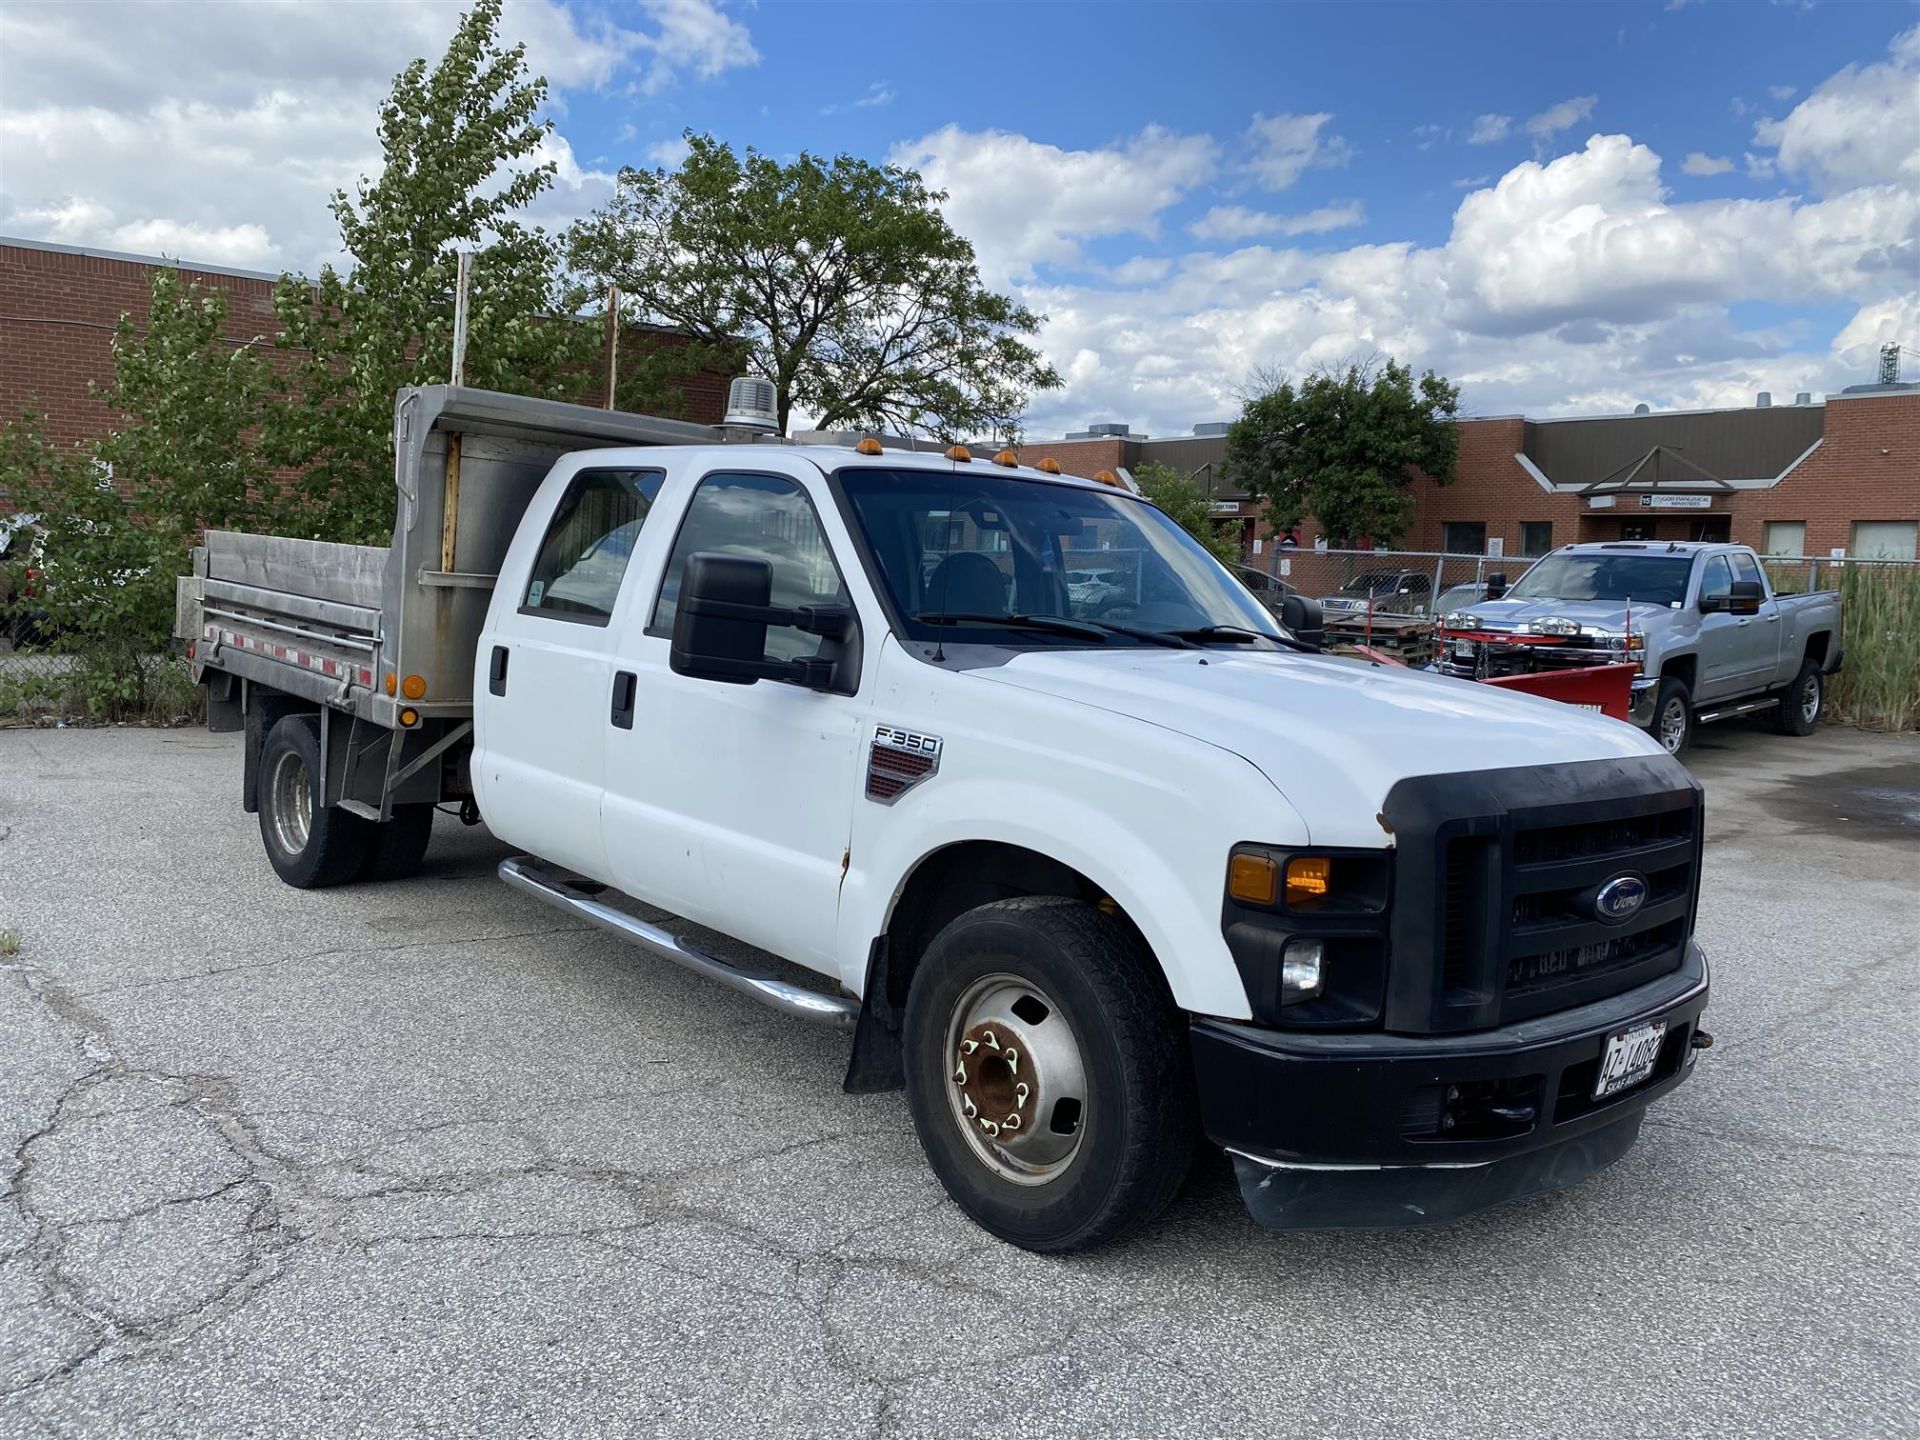 2008 FORD F-350 SUPERDUTY XL - 372,316KM - VIN # 1FDWW36R88EE62946 *CARFAX REPORT PROVIDED UPON - Image 4 of 8